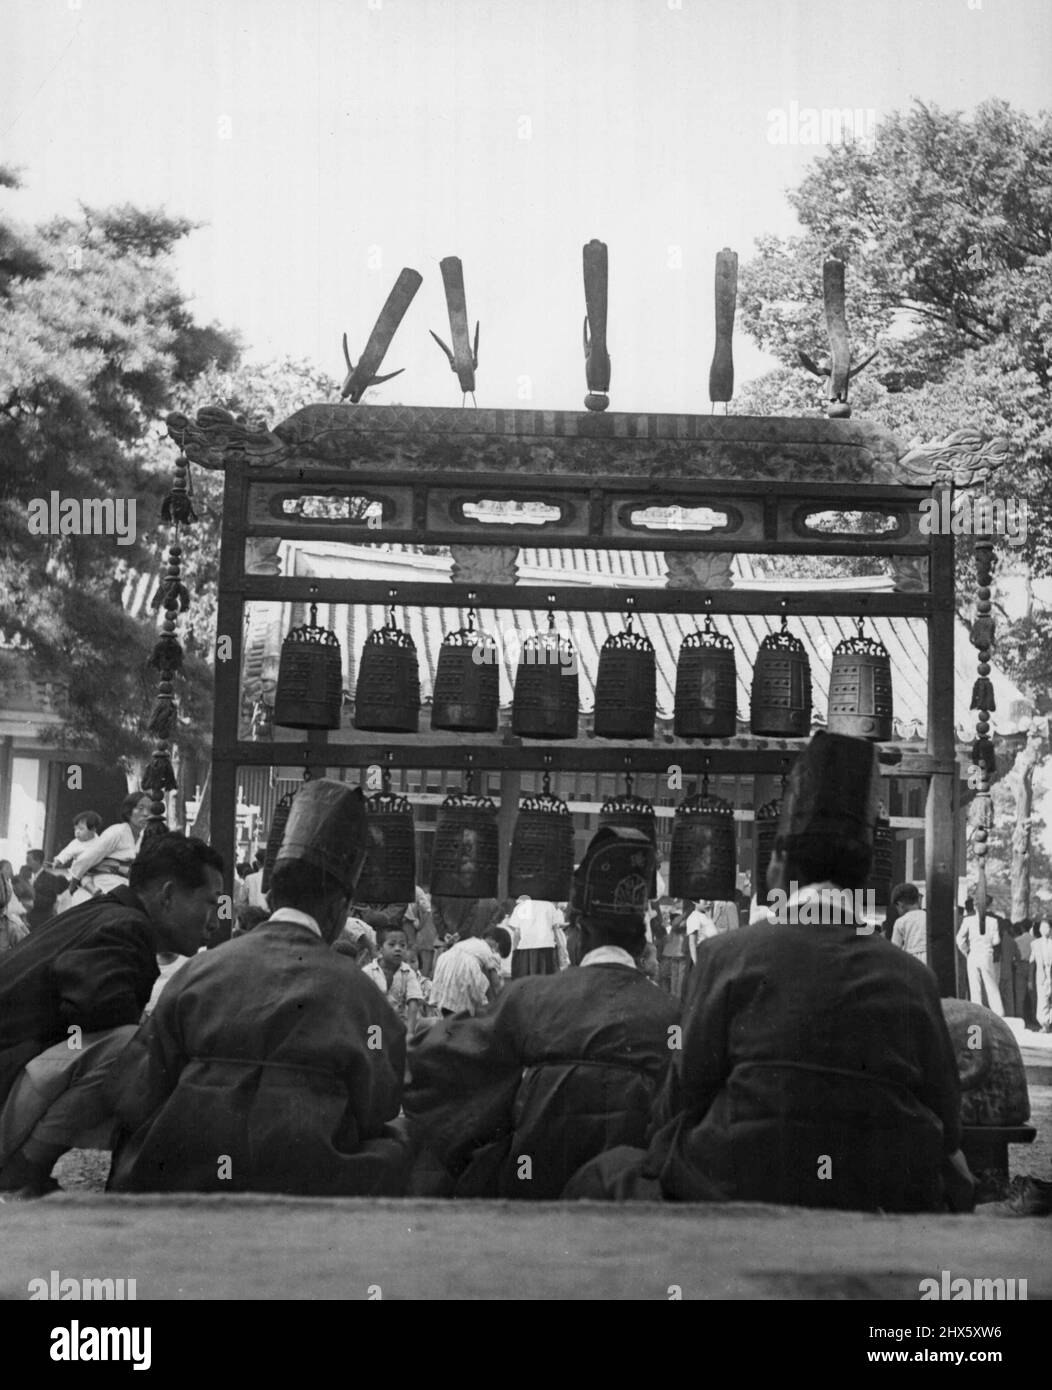 In Hour Of Confucius (Fourth Of Six) -- Another kind of musical instrument, the 'Bells,' are played at the entrance to the Chufu Temple, which is named for the birthplace of Confucius in Shantung Province, China. October 16, 1953. (Photo by United Press).;In Hour Of Confucius (Fourth Of Six) -- Another kind of musical instrument, the 'Bells,' are played at the entrance to the Chufu Temple, which is named for the birthplace of Confucius in Shantung Province, China. Stock Photo